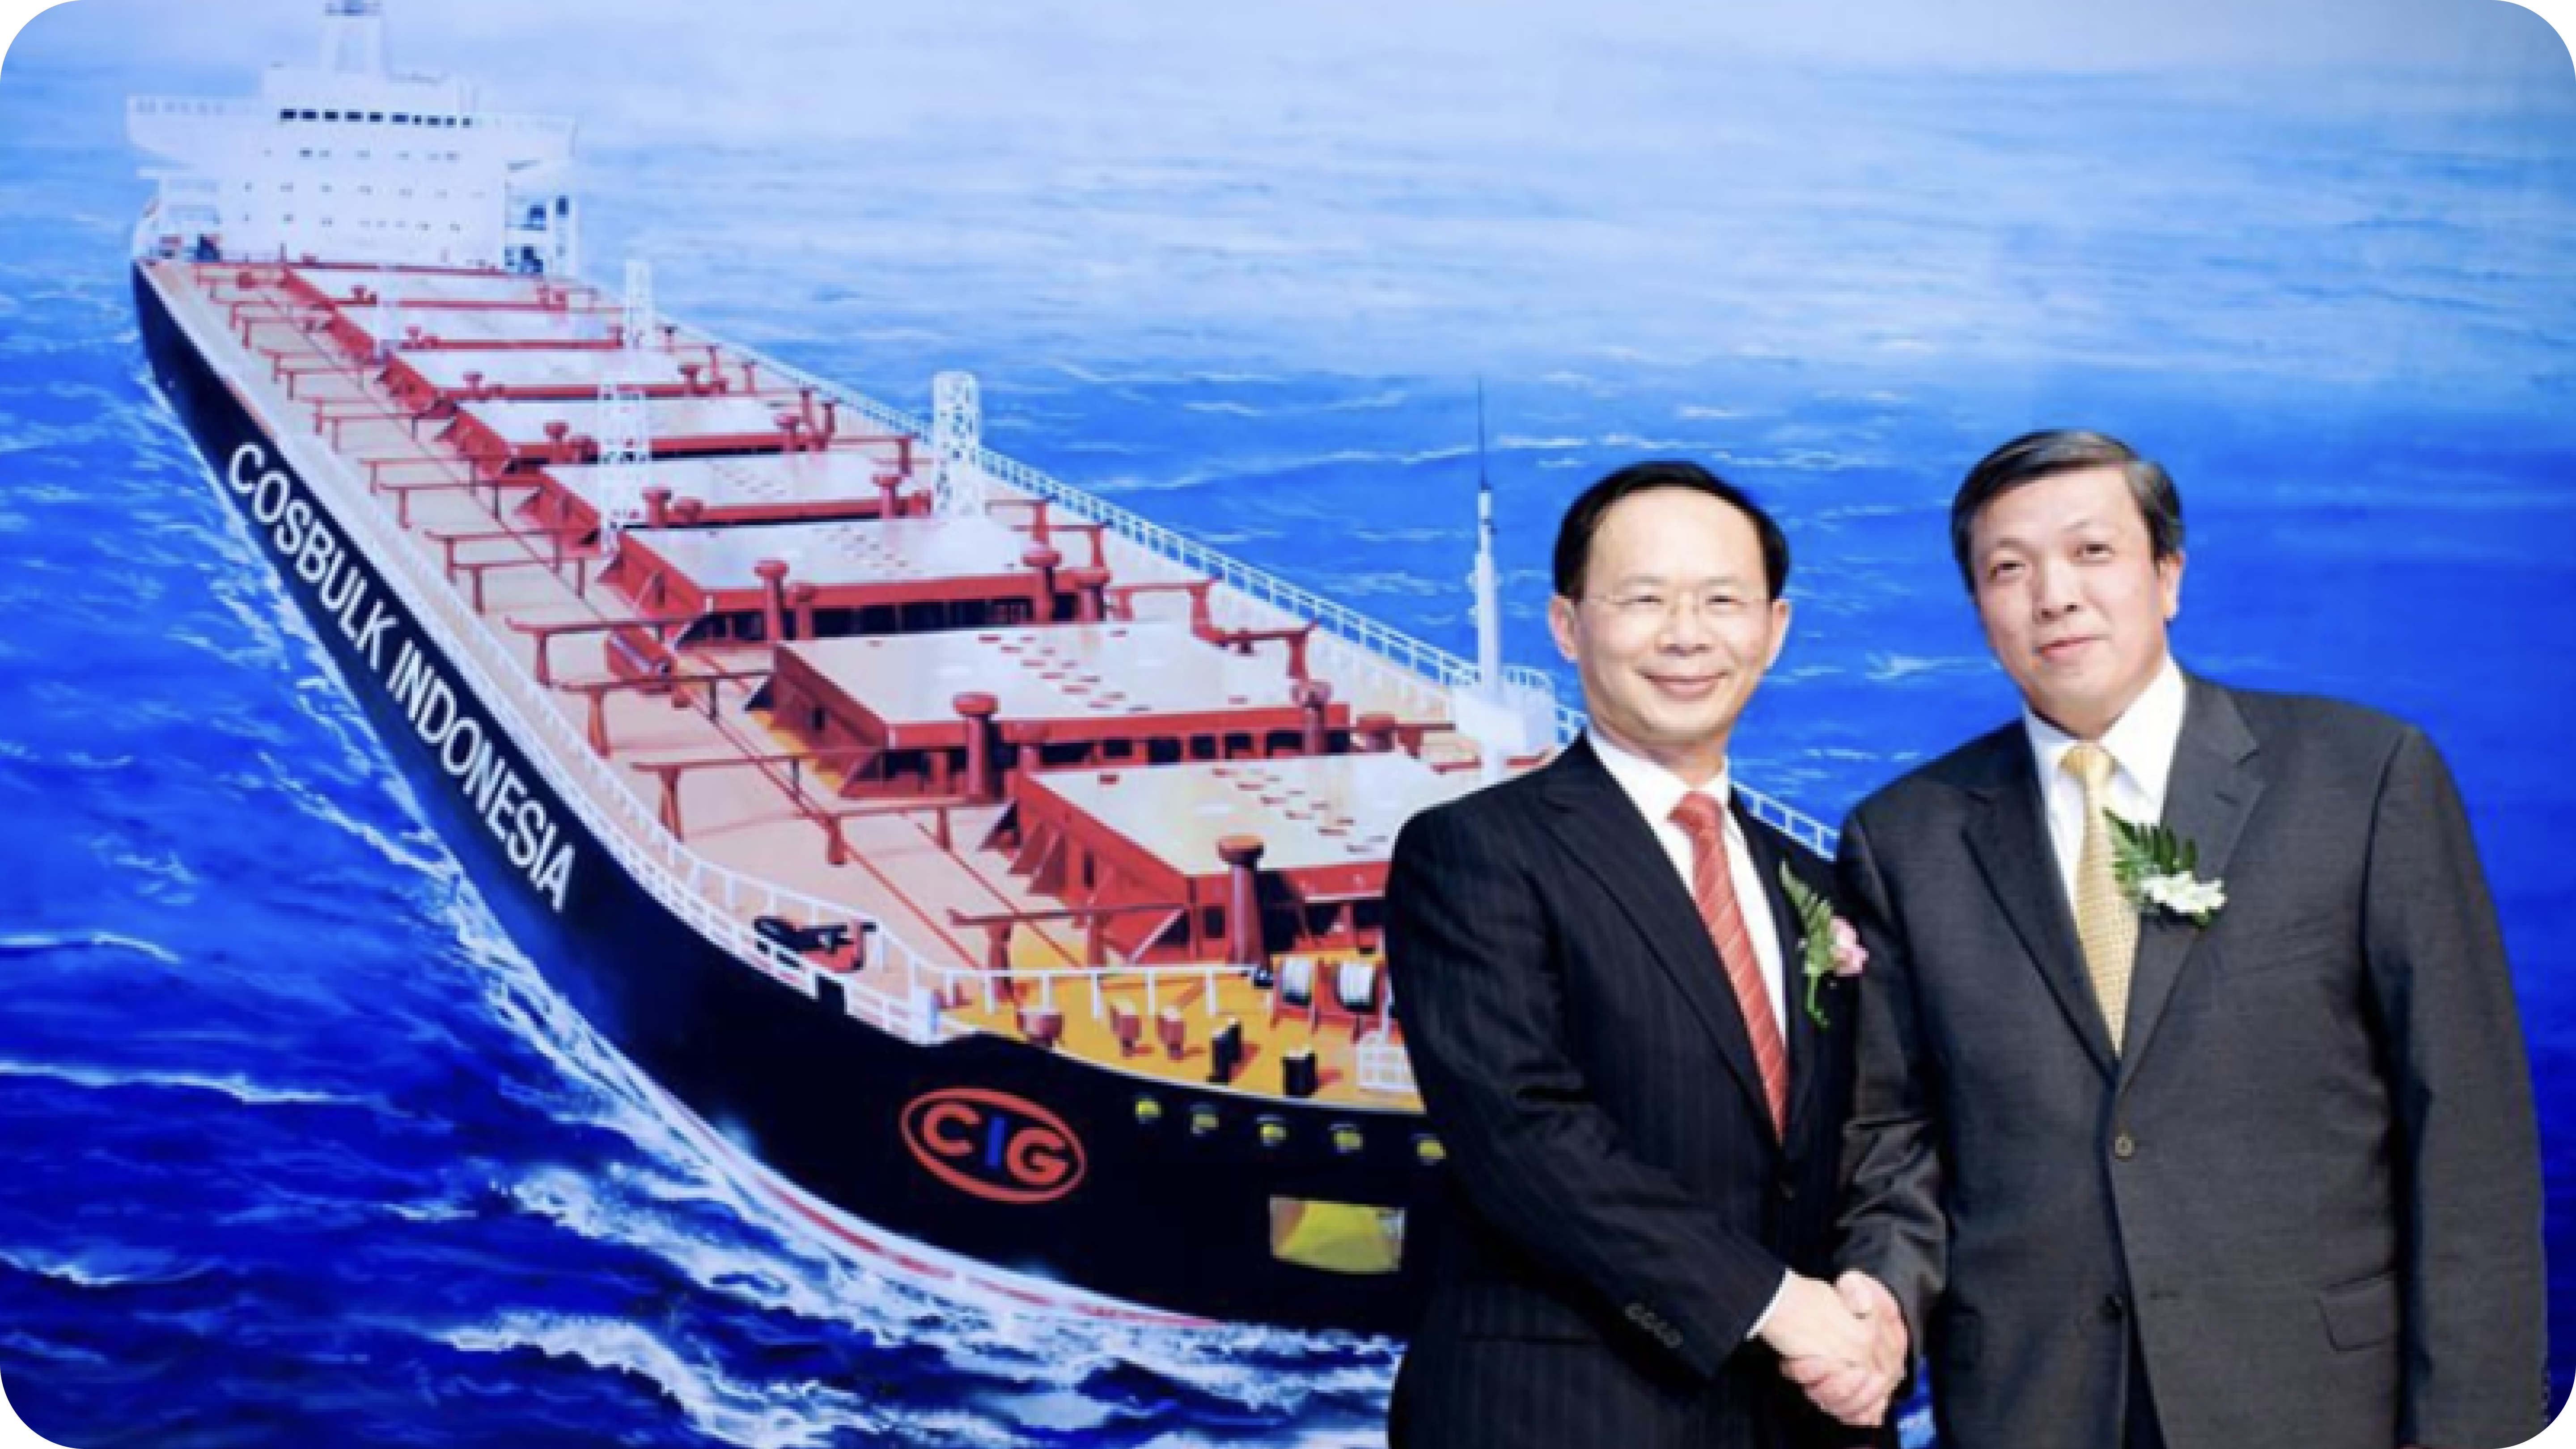 The Launching of PT Cosbulk Indonesia Global Shipping